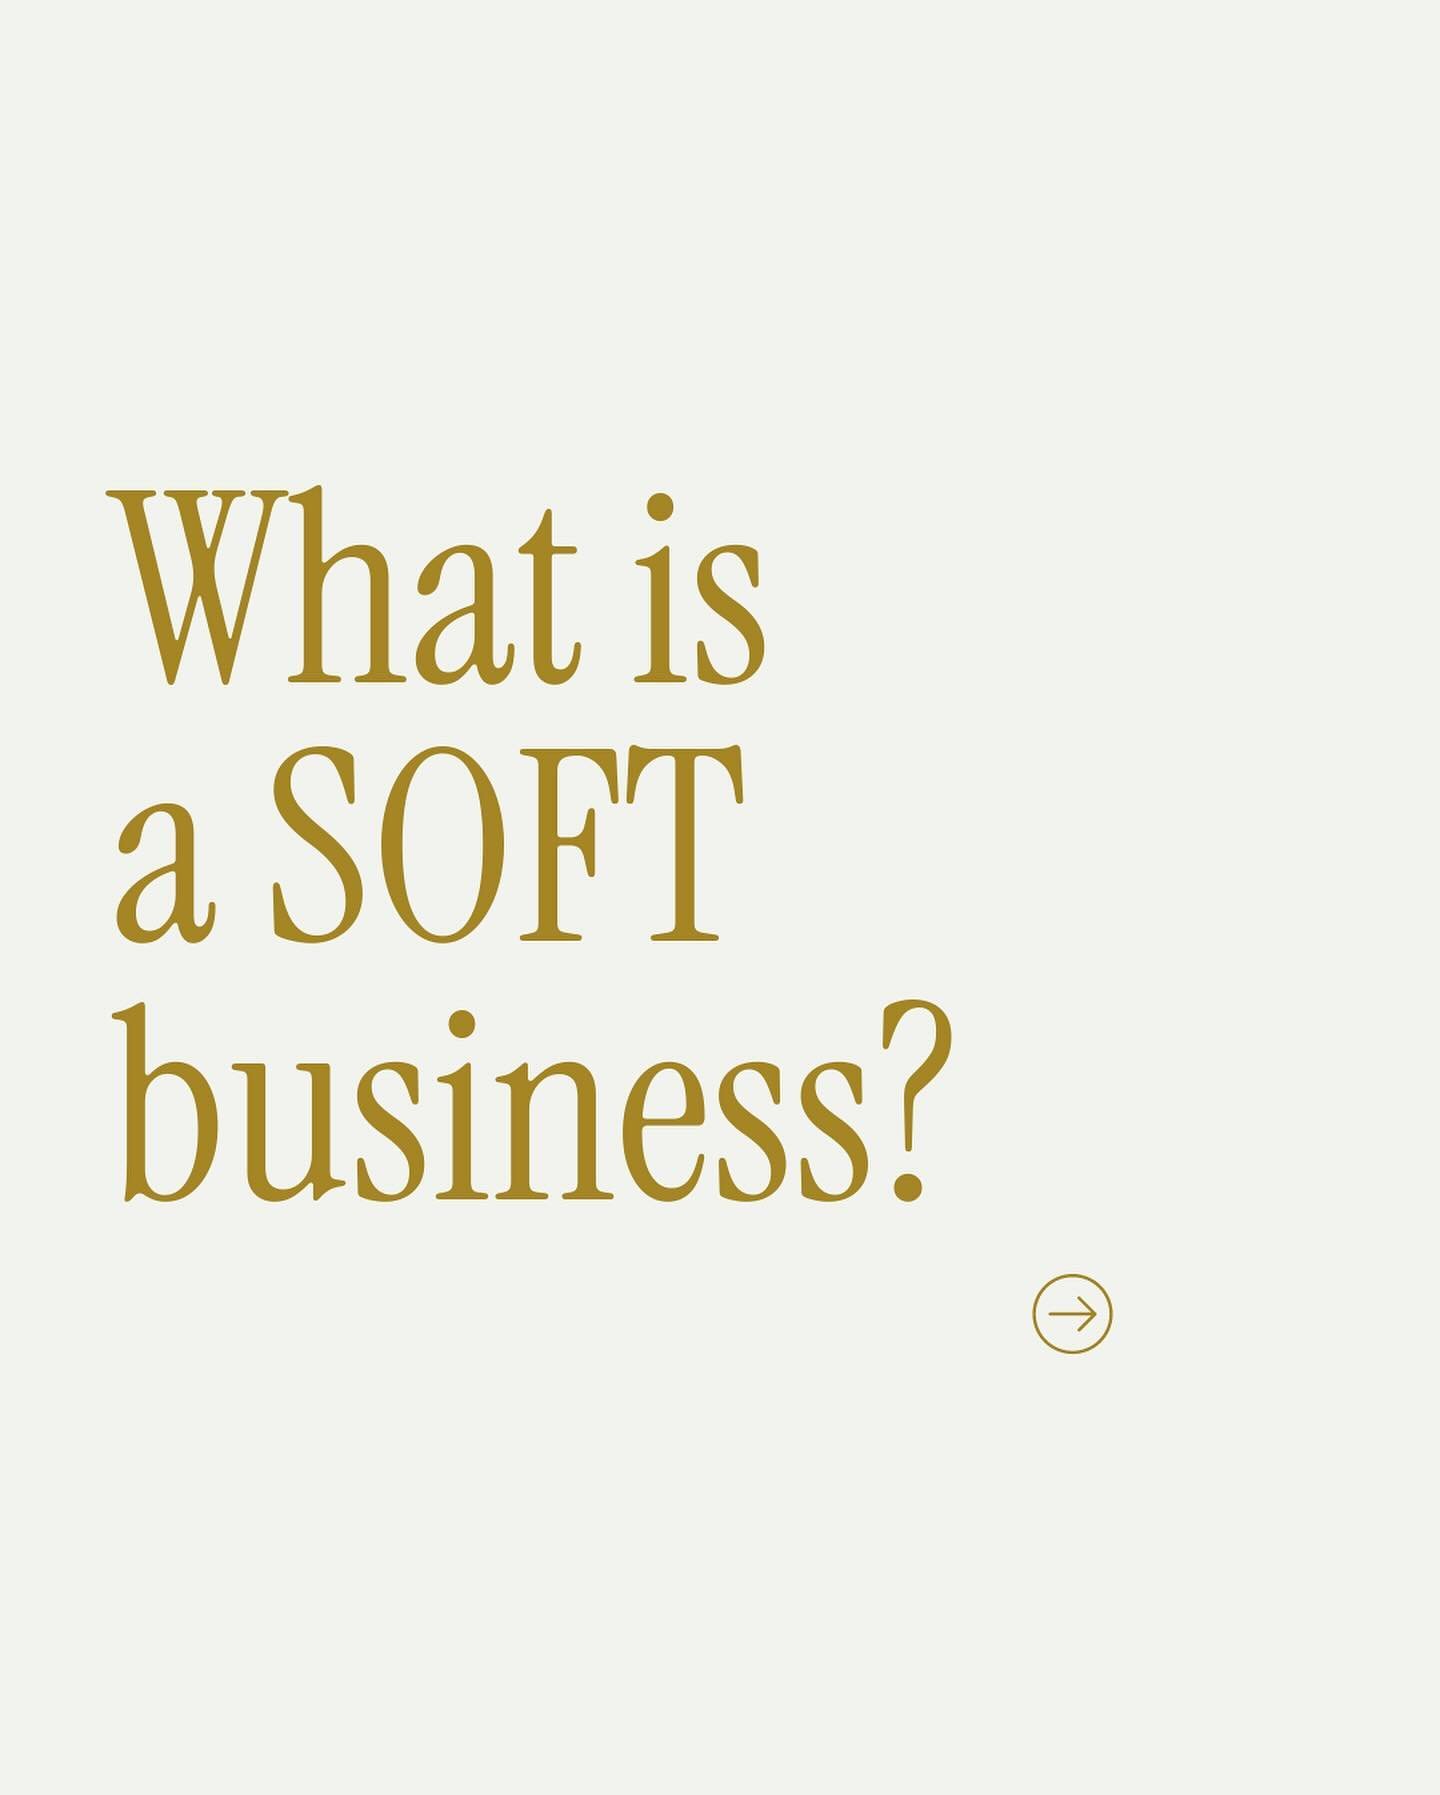 I was writing about a SOFT Business today when I was doing my morning pages. I think one of the (many) things I love about a SOFT business is that it&rsquo;s both STRATEGY and HEART. 

We can bring both to our business. 

SOFT is the new strong. 
🤍?